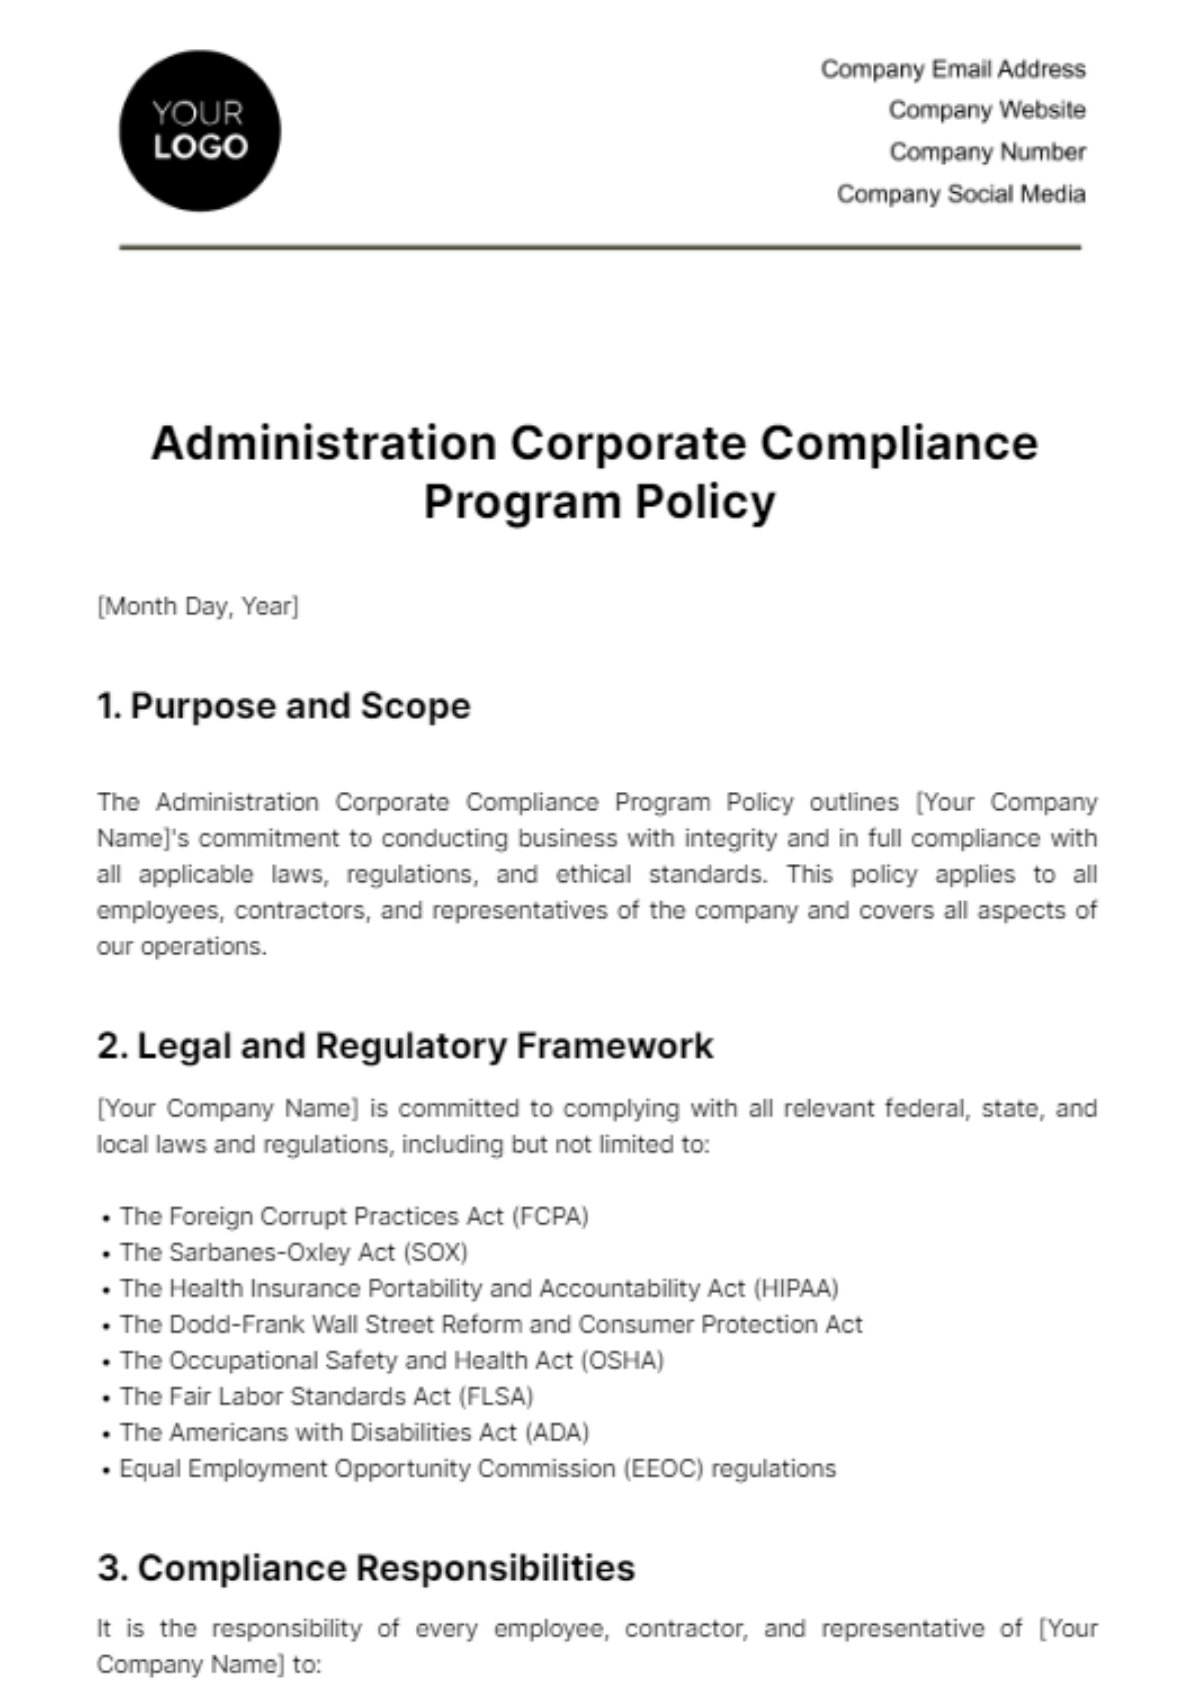 Administration Corporate Compliance Program Policy Template